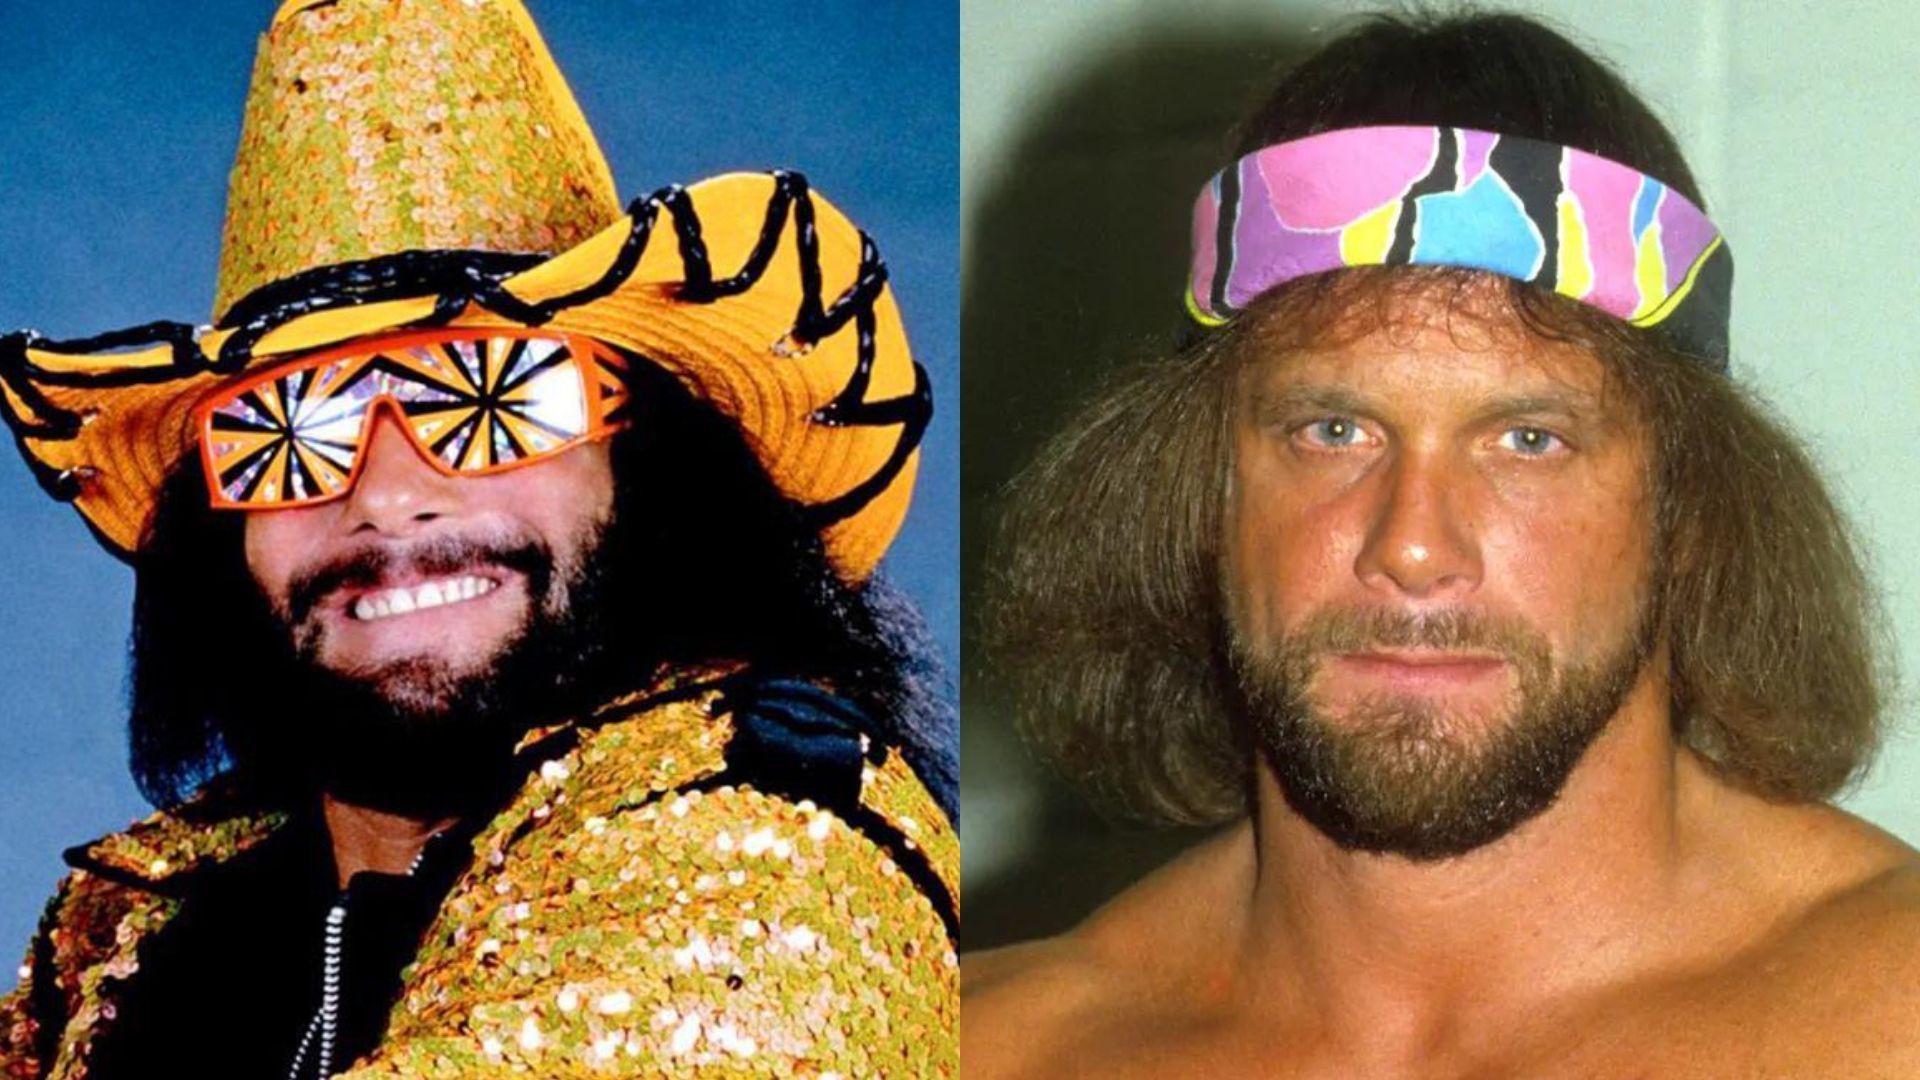 Macho Man is a legend of the wrestling industry.